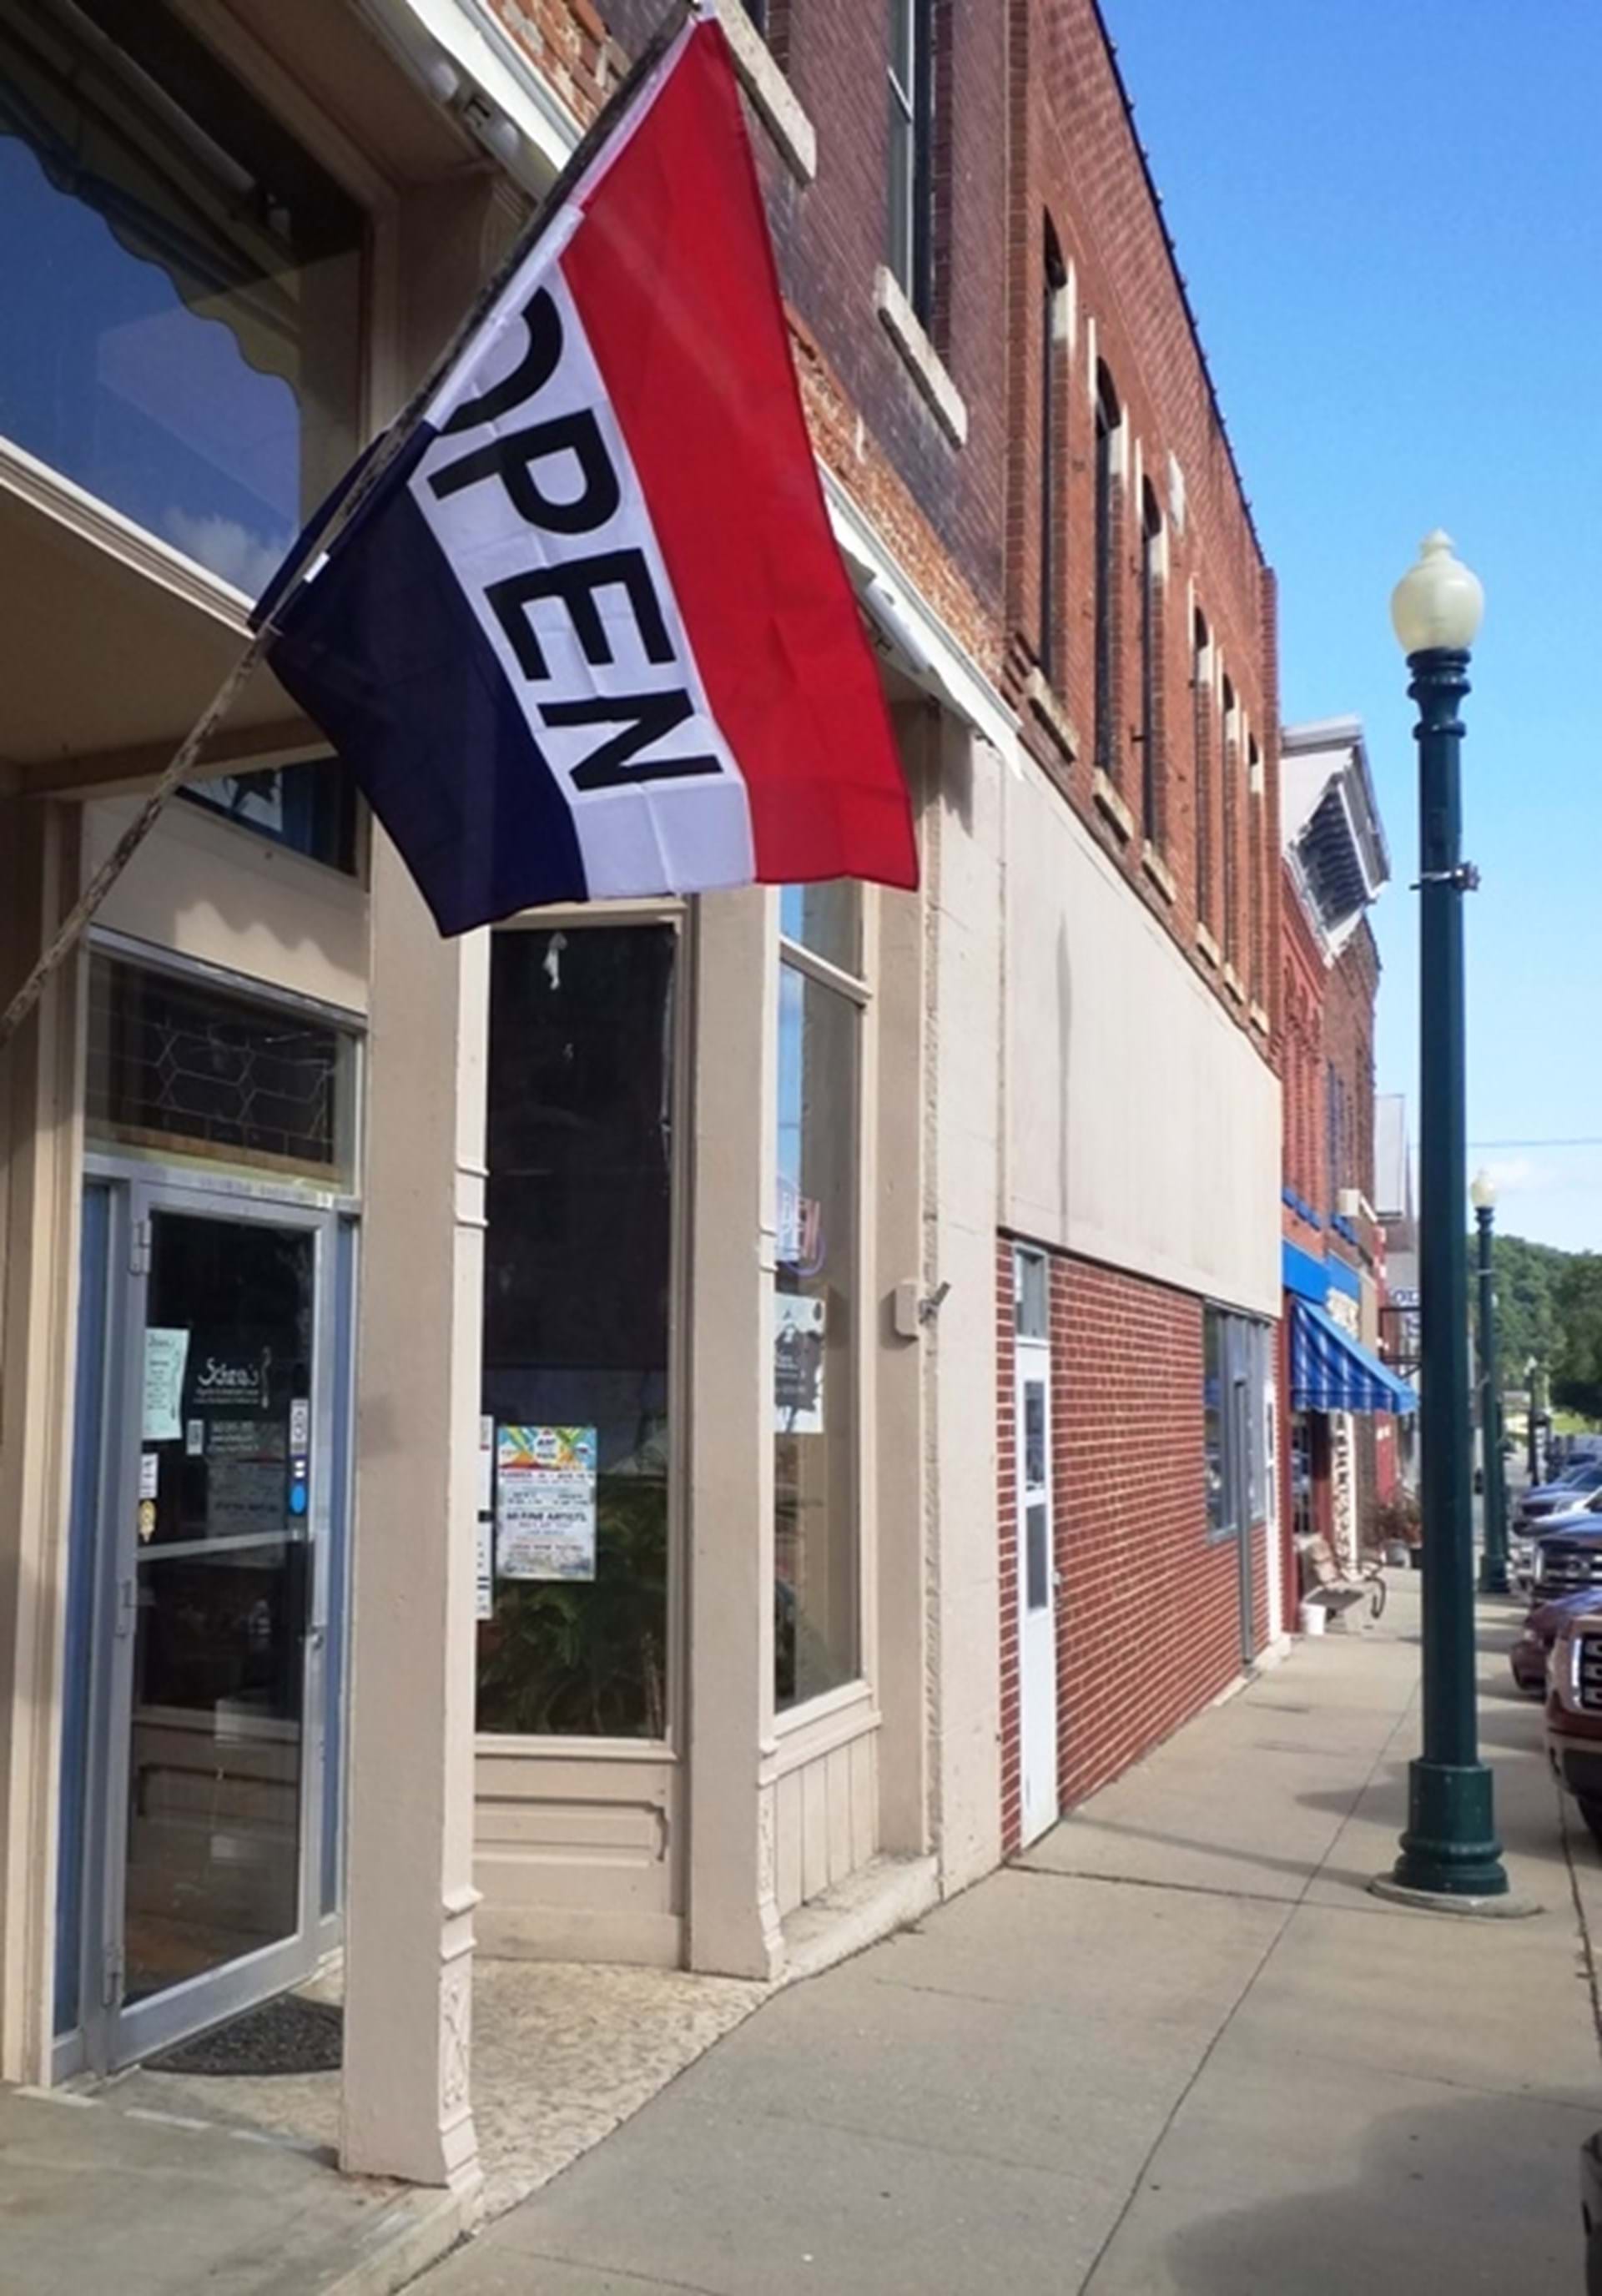 Located at 107 S Main Street in the Heart of Downtown Elkader.